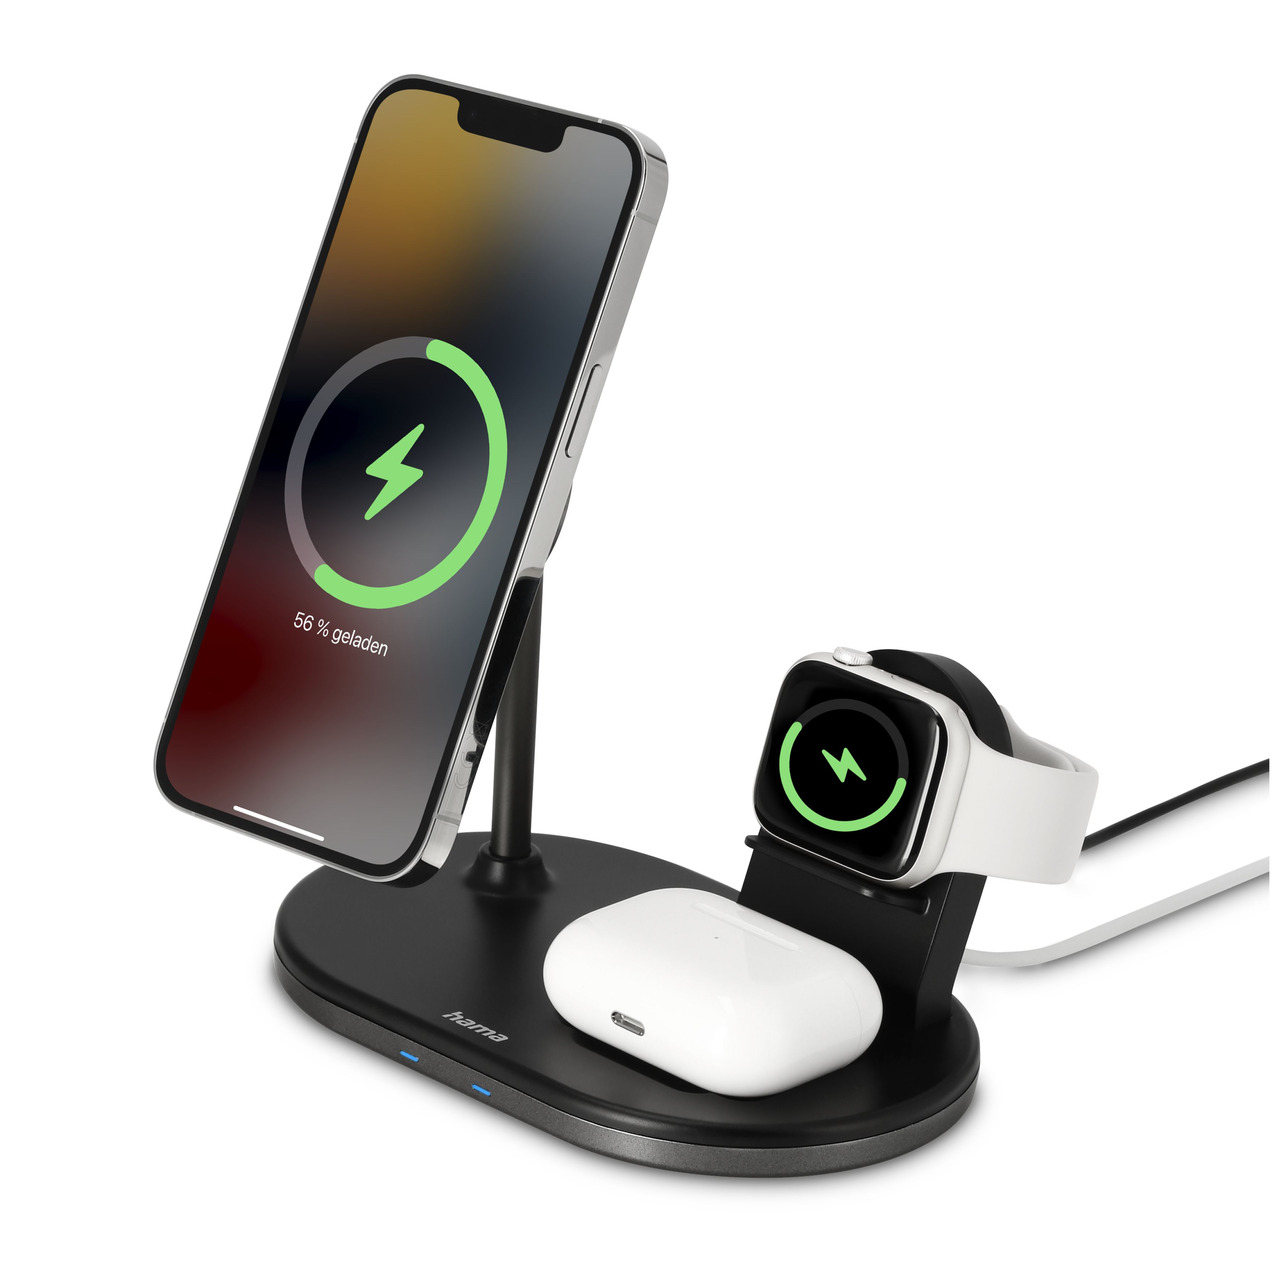 Hama 3-in-1 Induktions-Ladegert MagCharge Multi fr iPhone- AirPods und Apple Watch